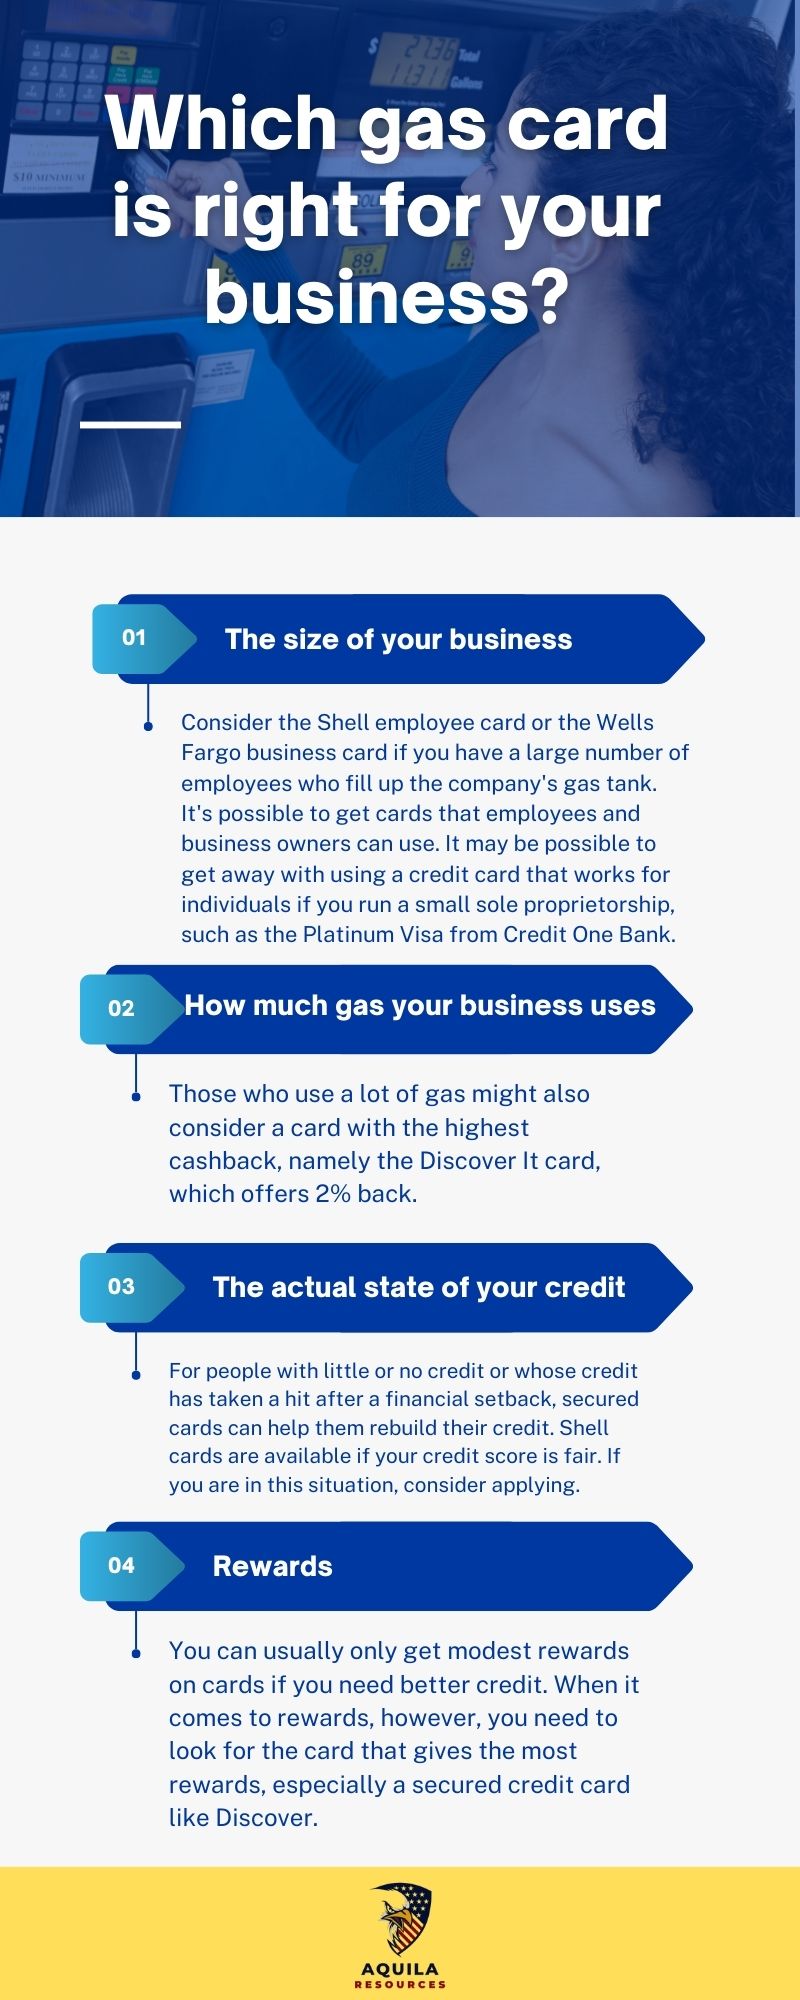 Which gas card is right for your business?